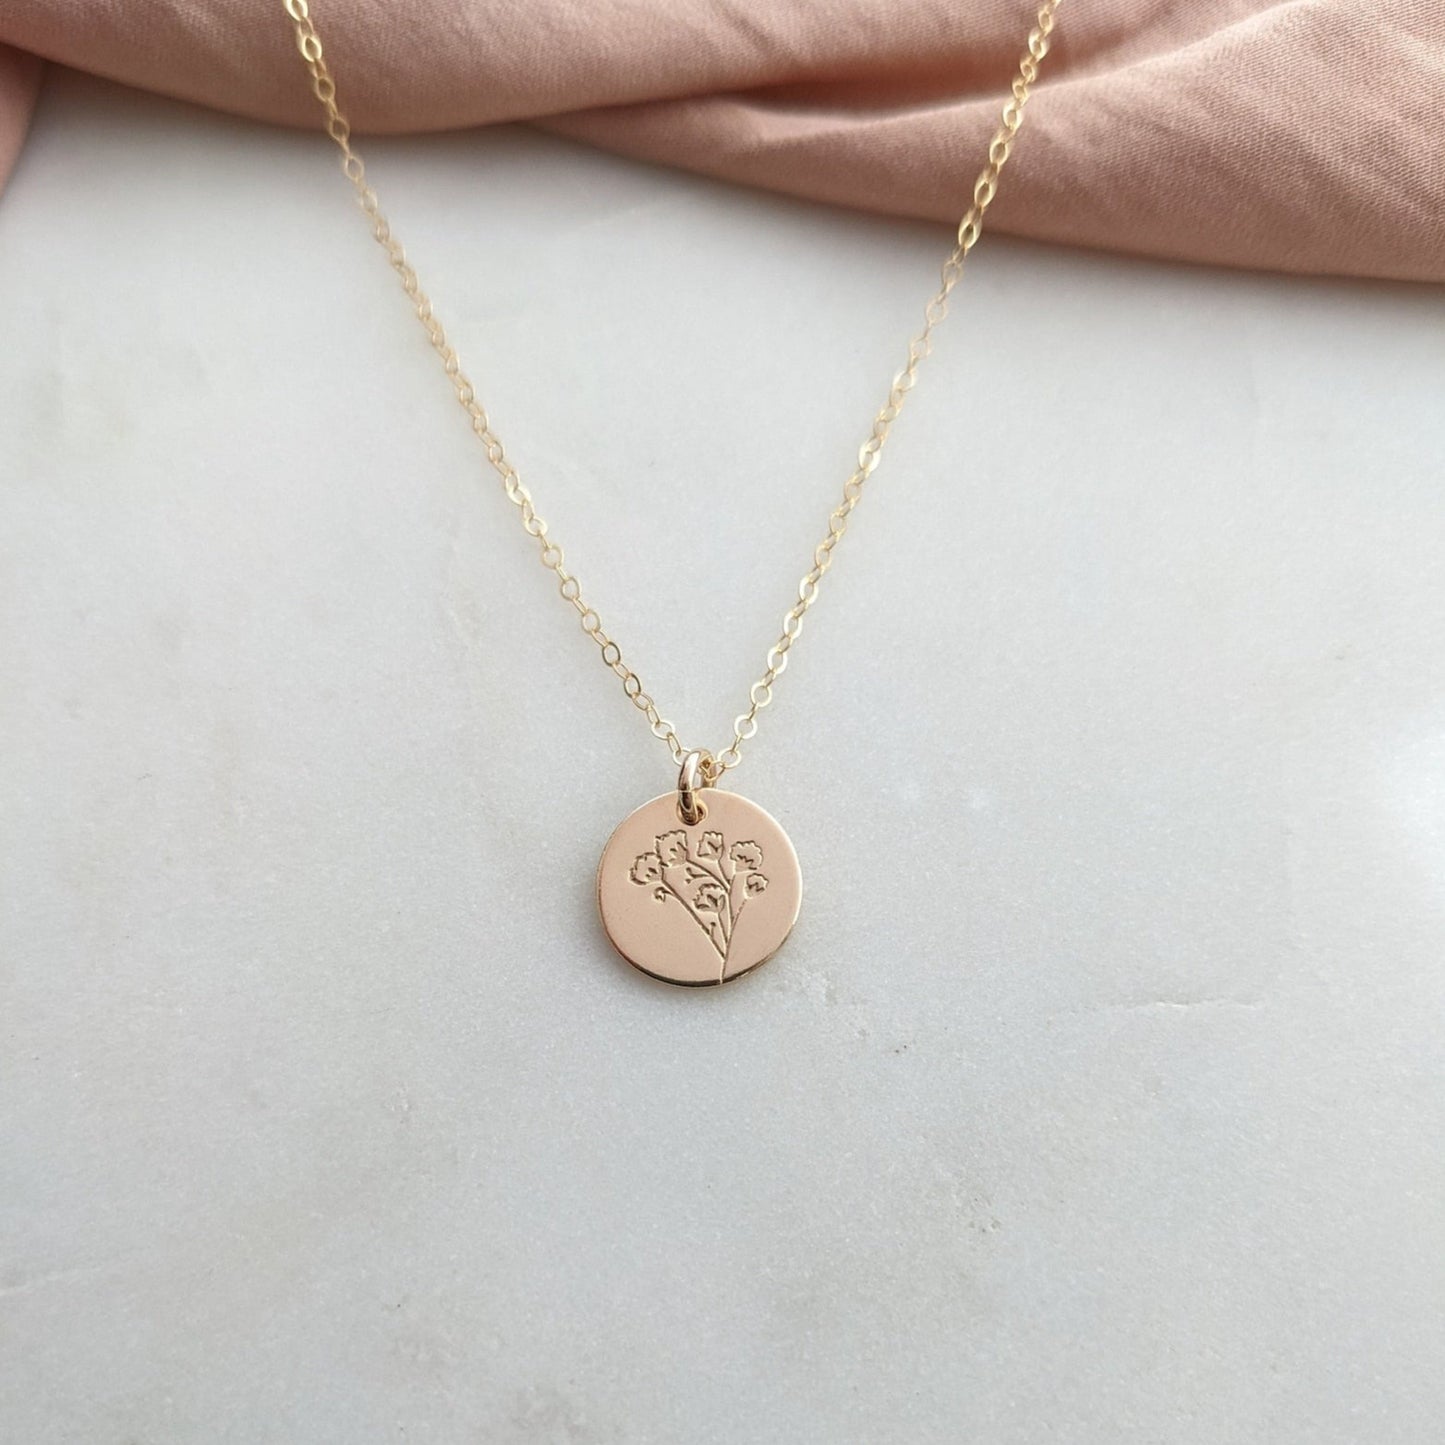 gold babies breath necklace